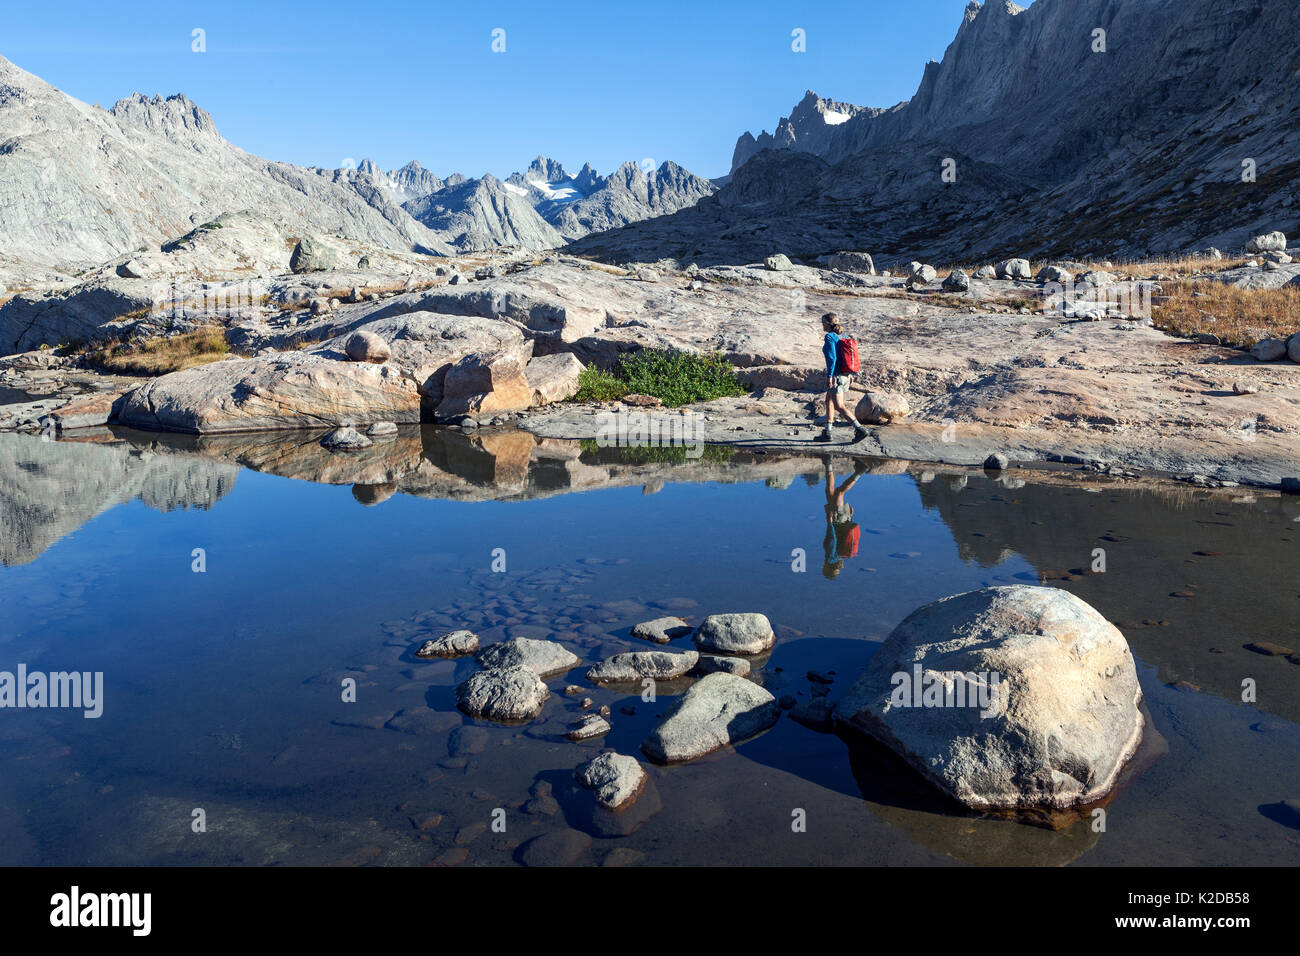 Woman hiker walking round mountain lake in Titcomb Basin in Wind River Range of Bridger Wilderness, Bridger National Forest, Wyoming, USA. September 2015. Model released Stock Photo